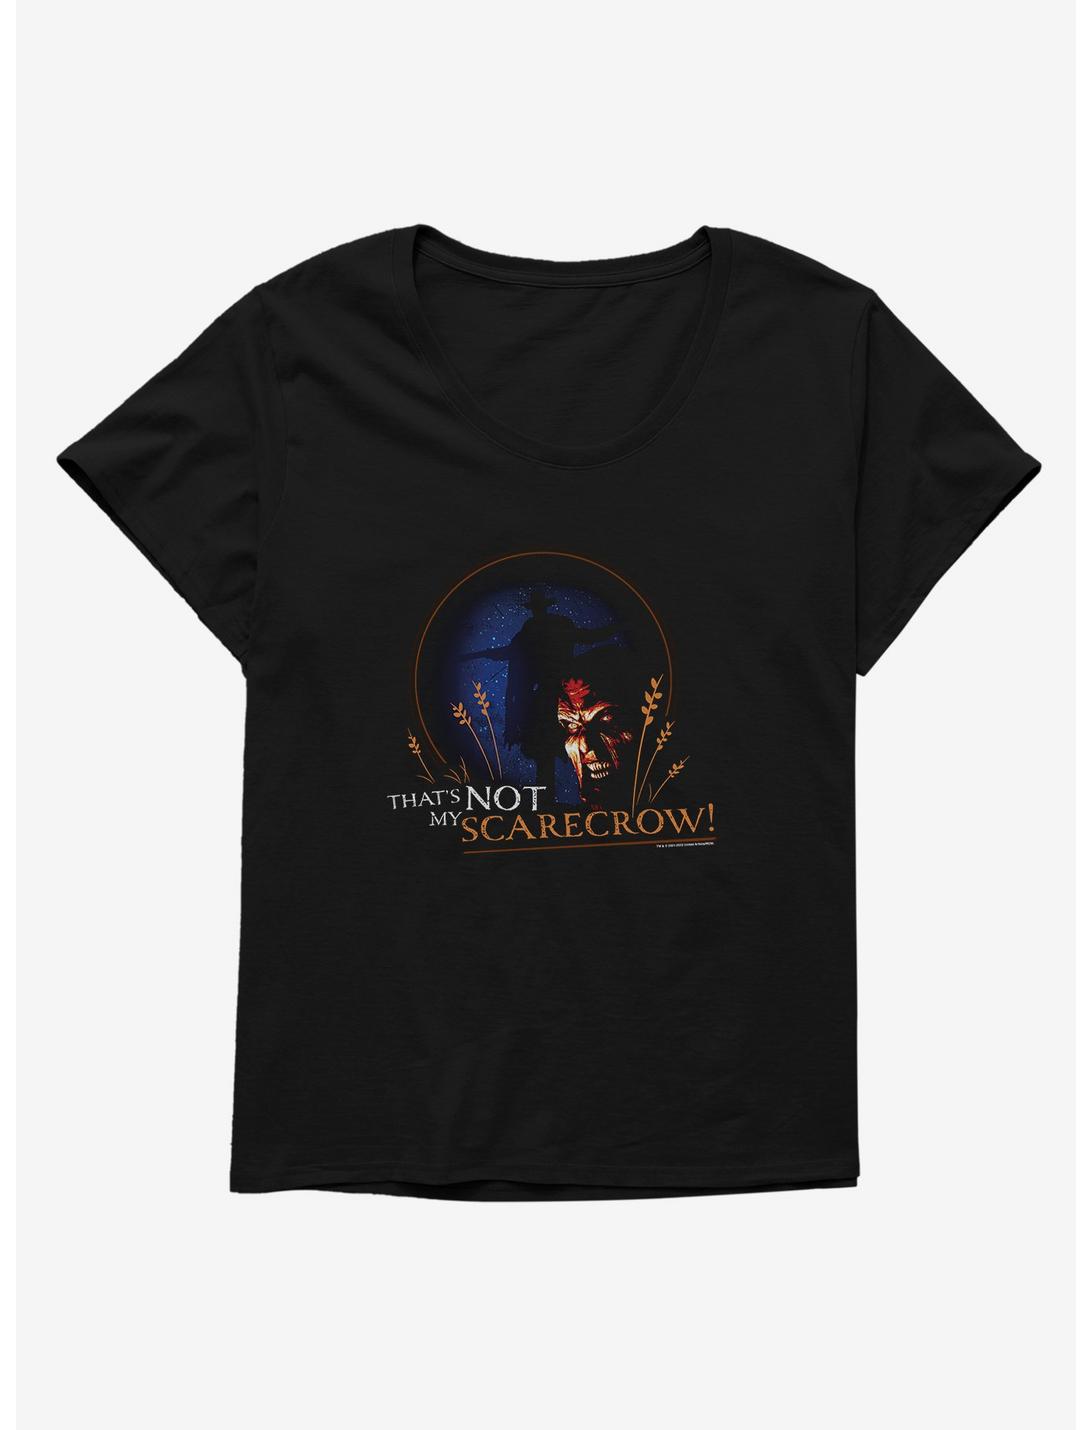 Jeepers Creepers That's Not My Scarecrow Womens T-Shirt Plus Size, BLACK, hi-res